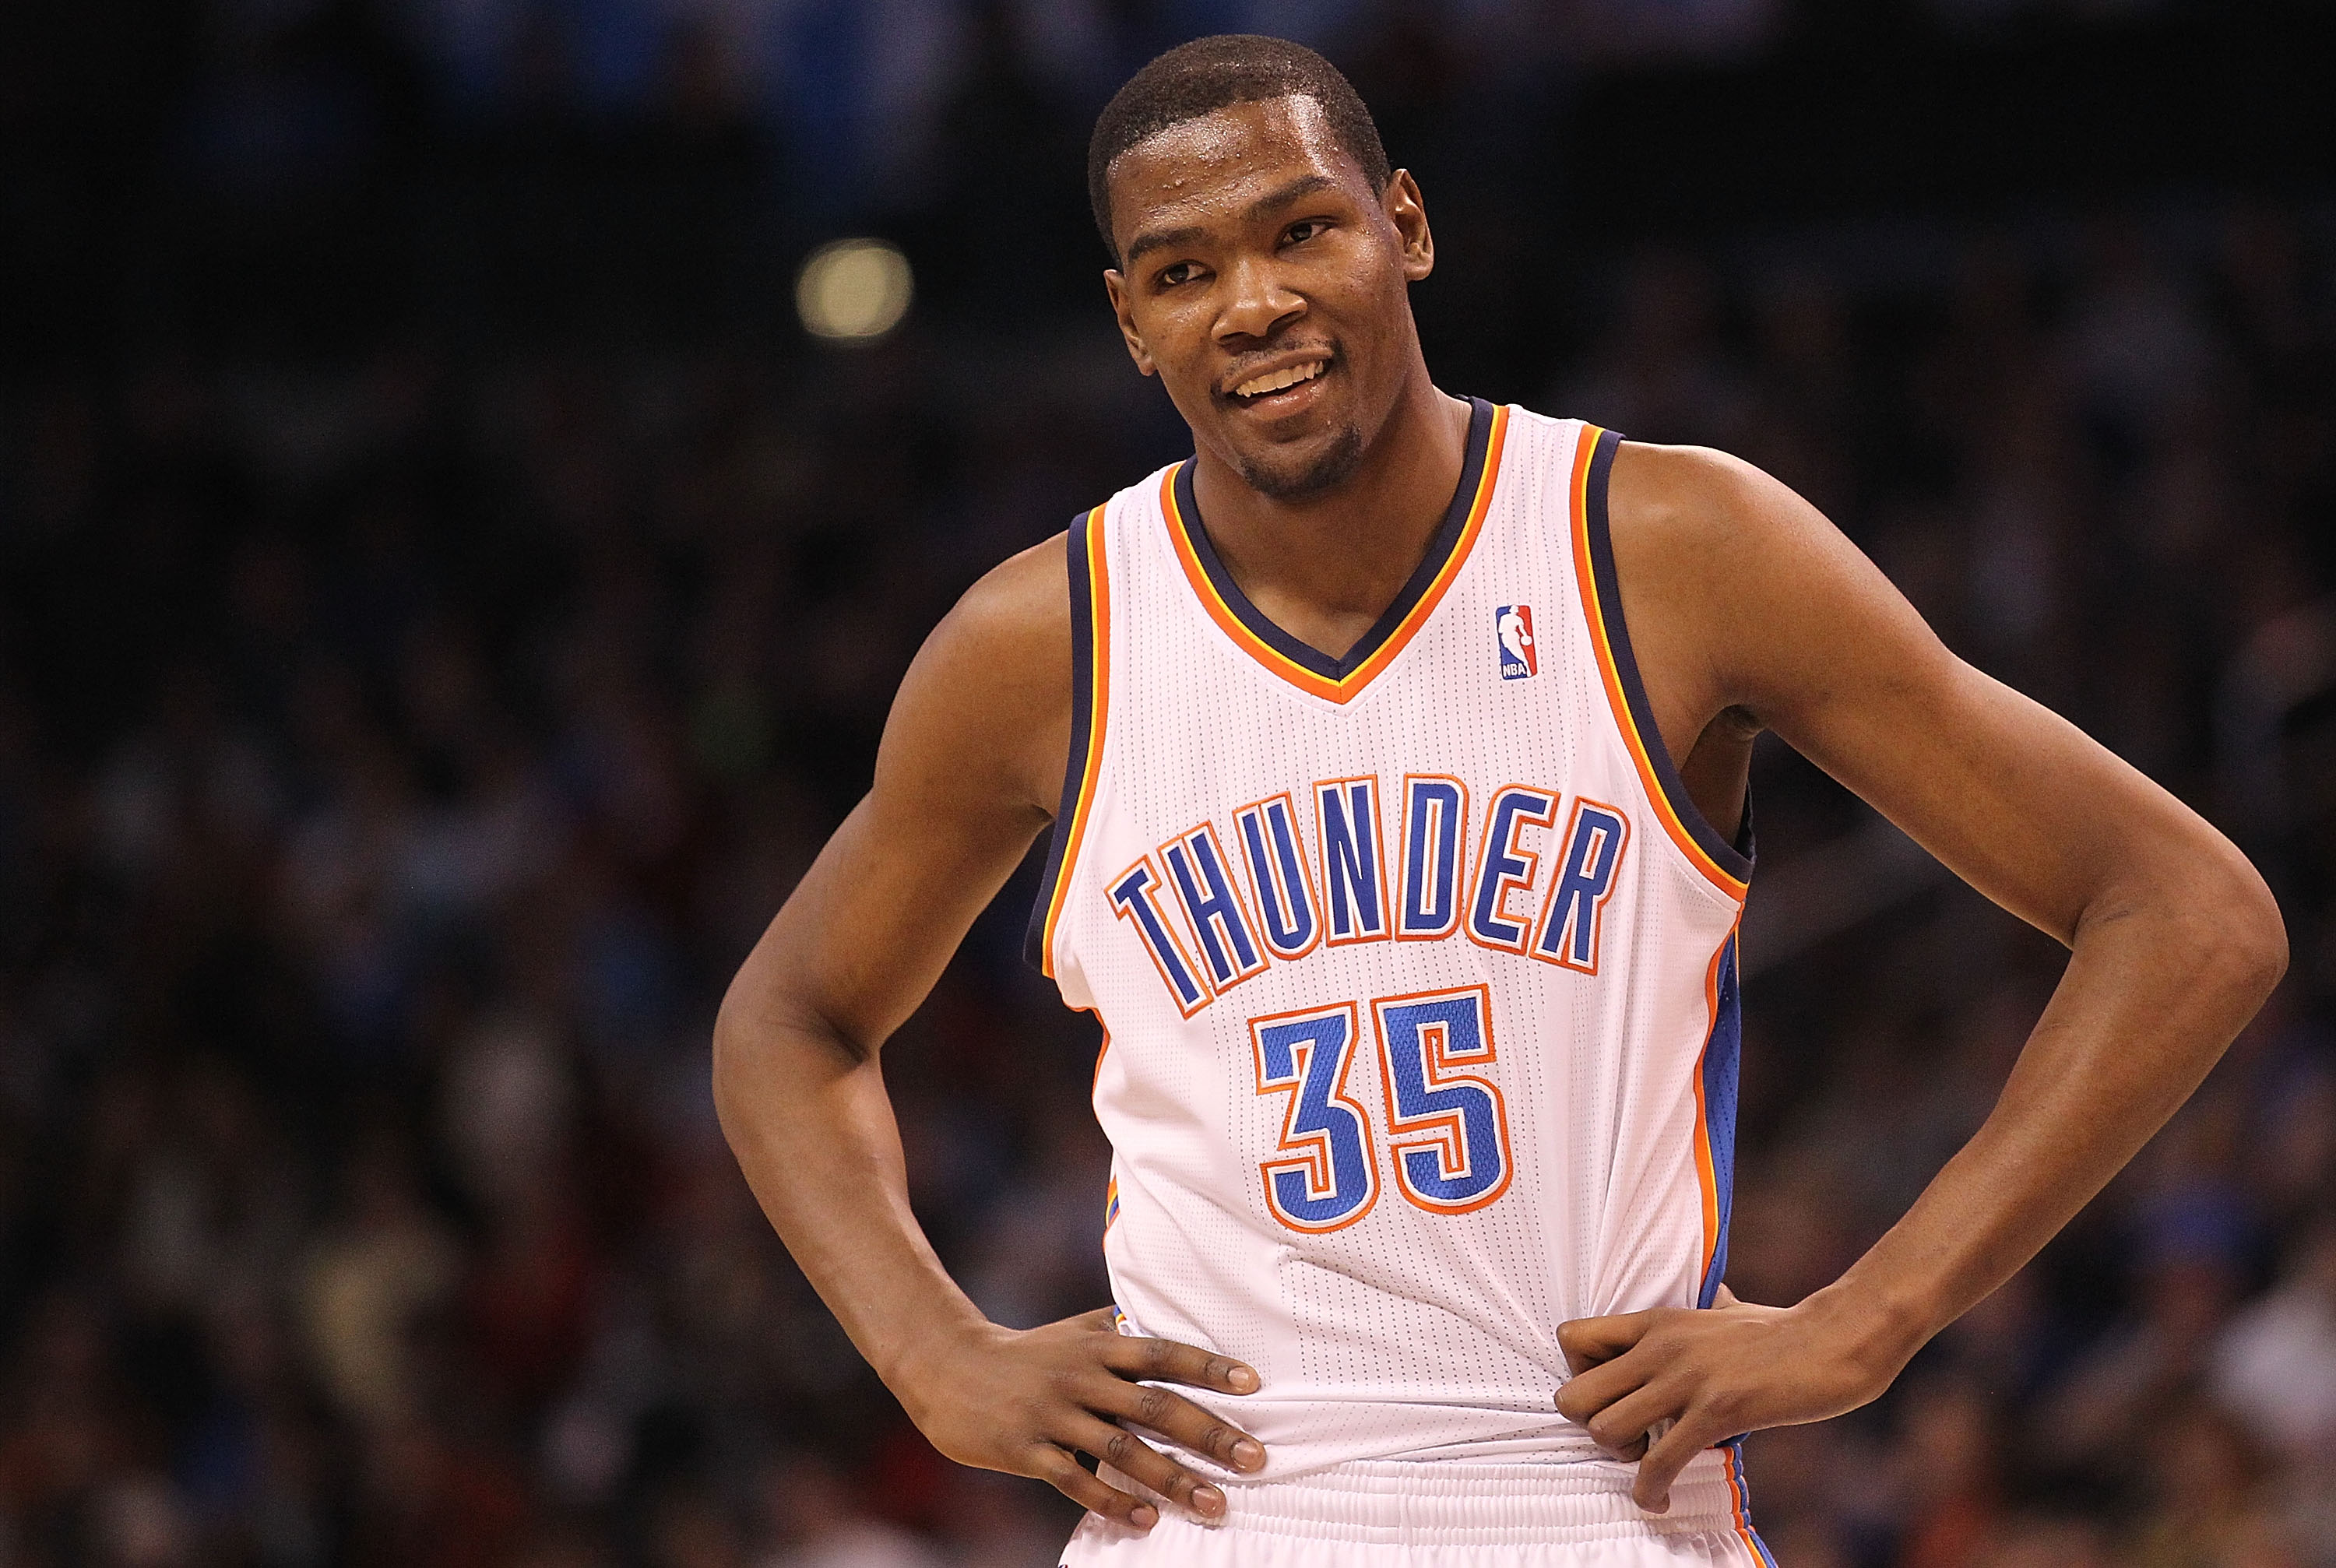 OKLAHOMA CITY, OK - JANUARY 30:  Kevin Durant #35 of the Oklahoma City Thunder at Ford Center on January 30, 2011 in Oklahoma City, Oklahoma.  NOTE TO USER: User expressly acknowledges and agrees that, by downloading and or using this photograph, User is